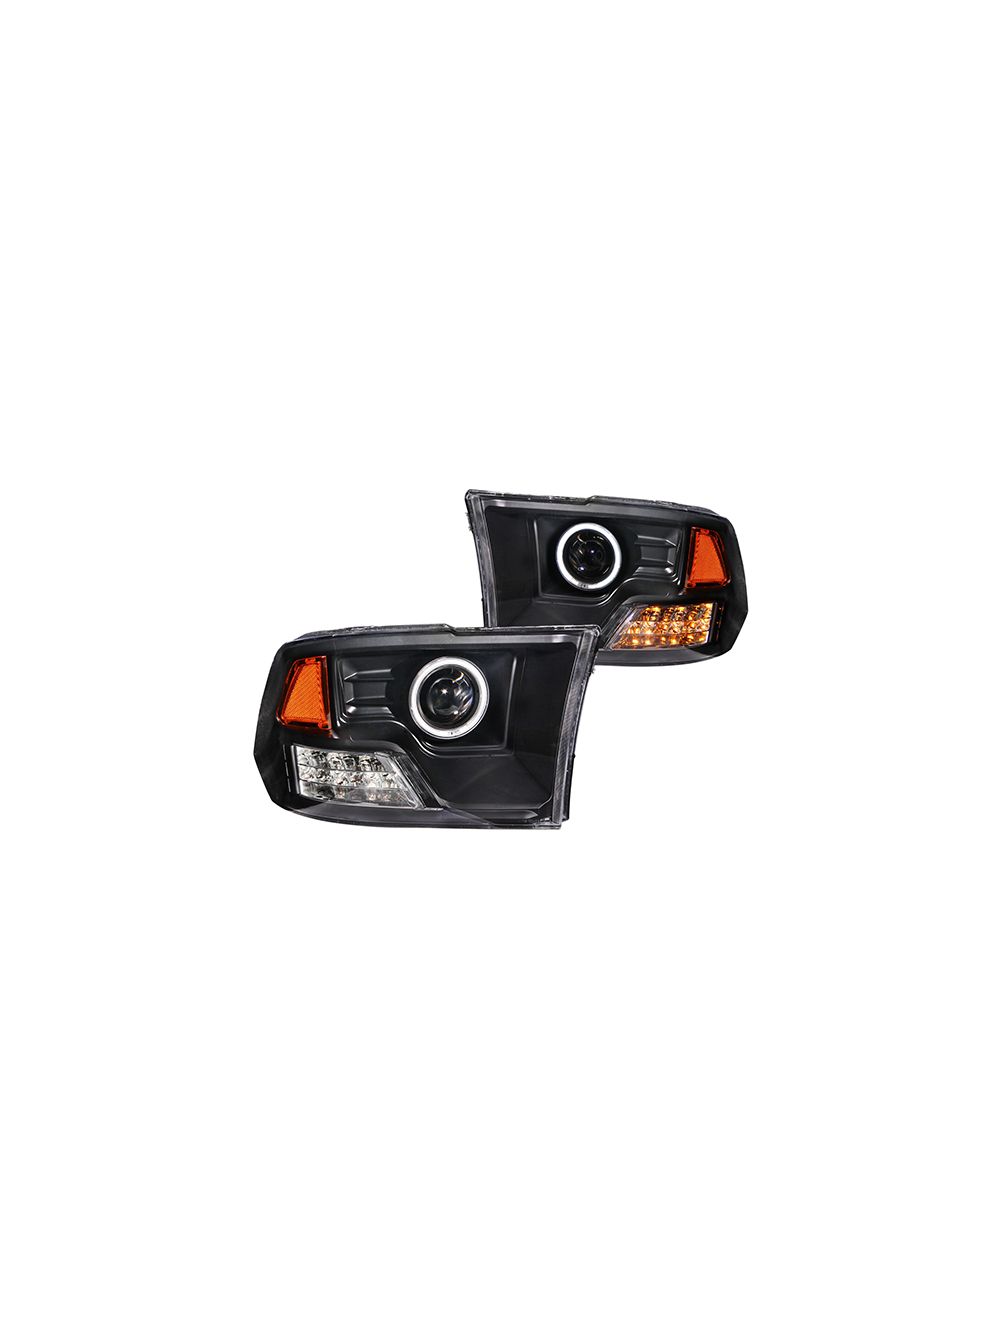 Anzo ANZ111159 Black Projector with Halo Amber (CCFL) Headlights for Dodge Ram 1500 2009 - 2015 & 2500/3500 2010 - 2015